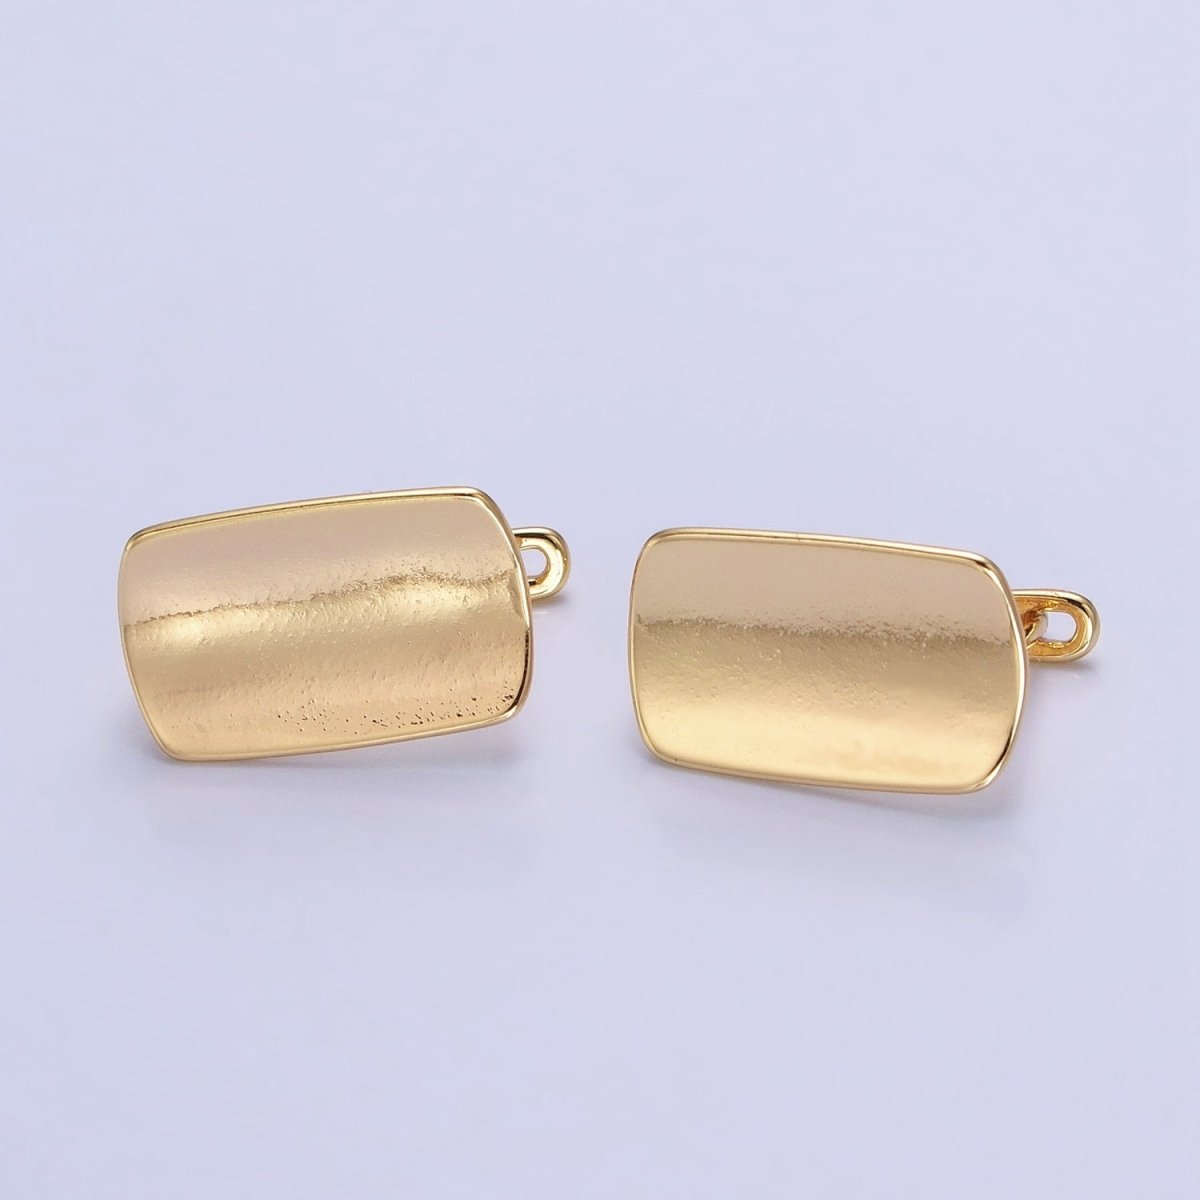 24K Gold Filled Curved Oblong Rectangular Open Loop English Lock Earrings Supply in Silver & Gold | Z-198 Z-333 - DLUXCA